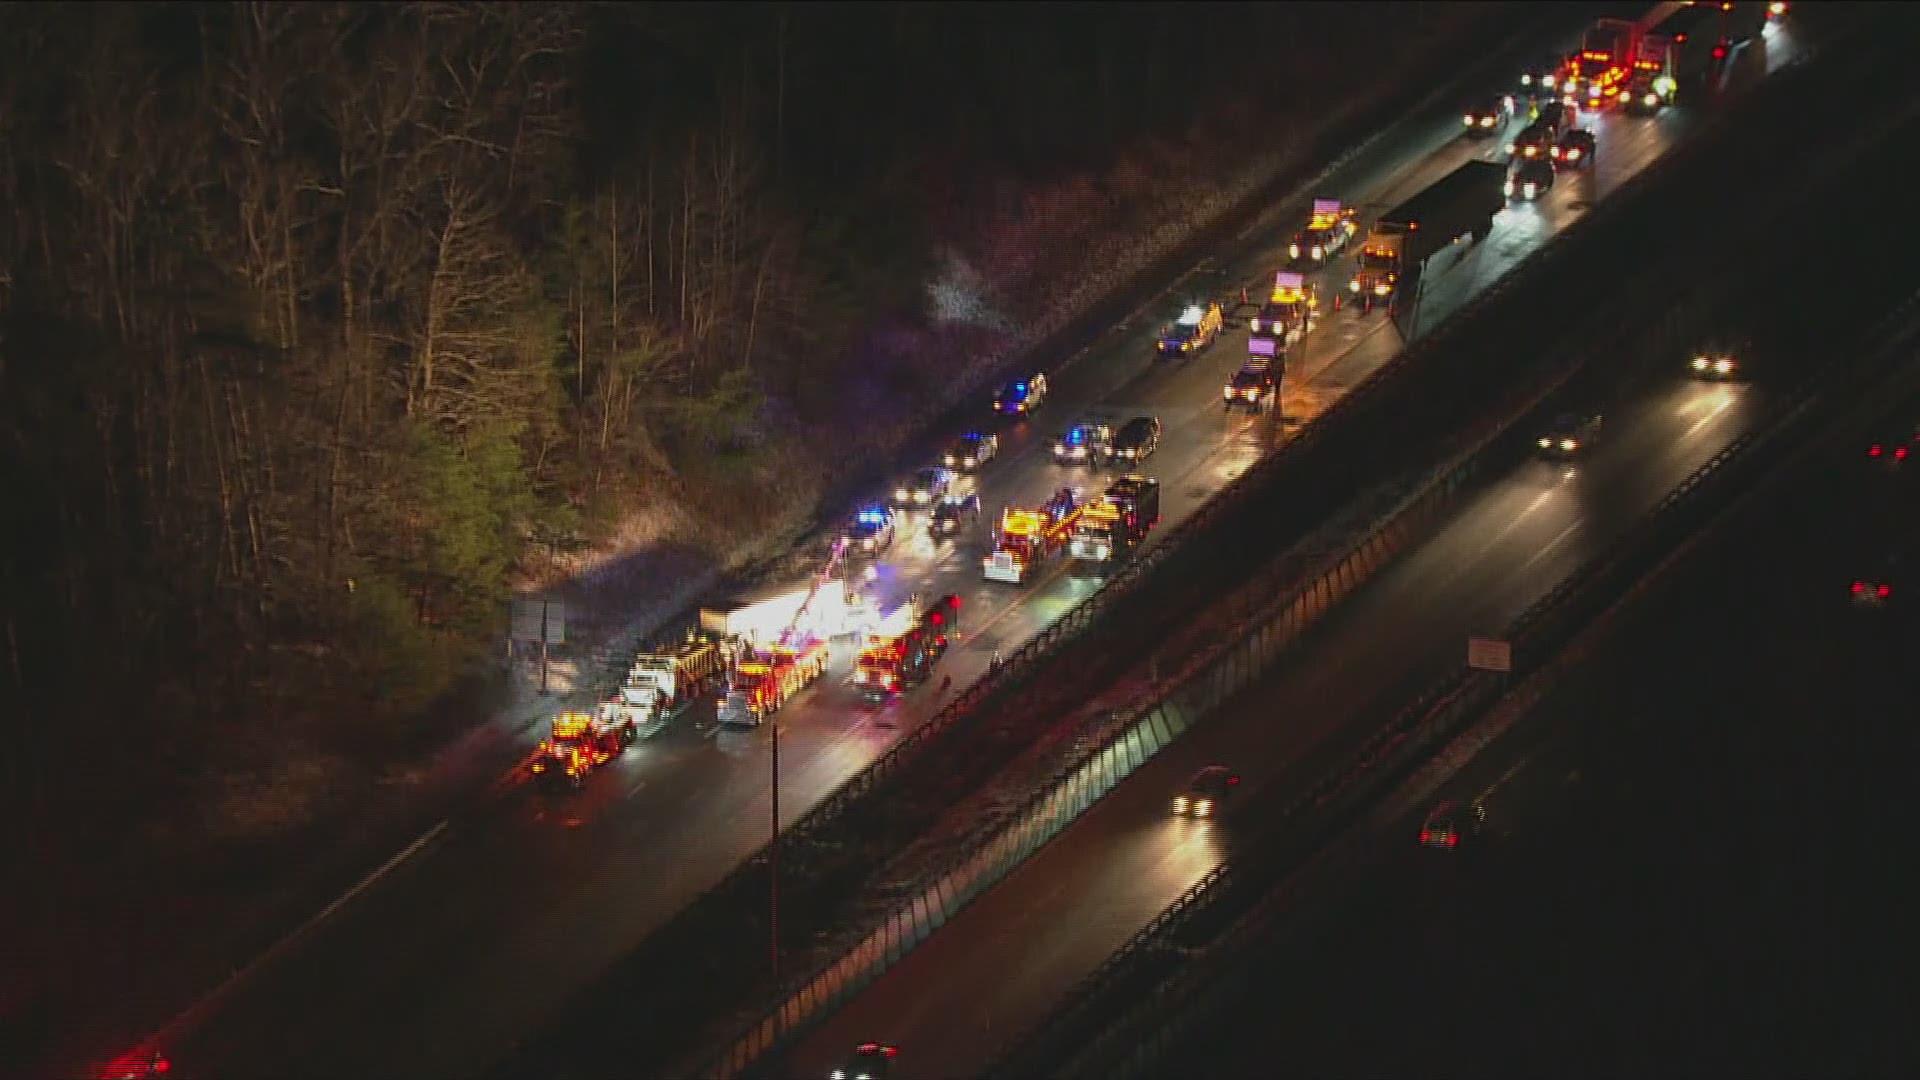 All lanes were closed on NB I-95 on Wednesday morning following a deadly crash near Quantico.